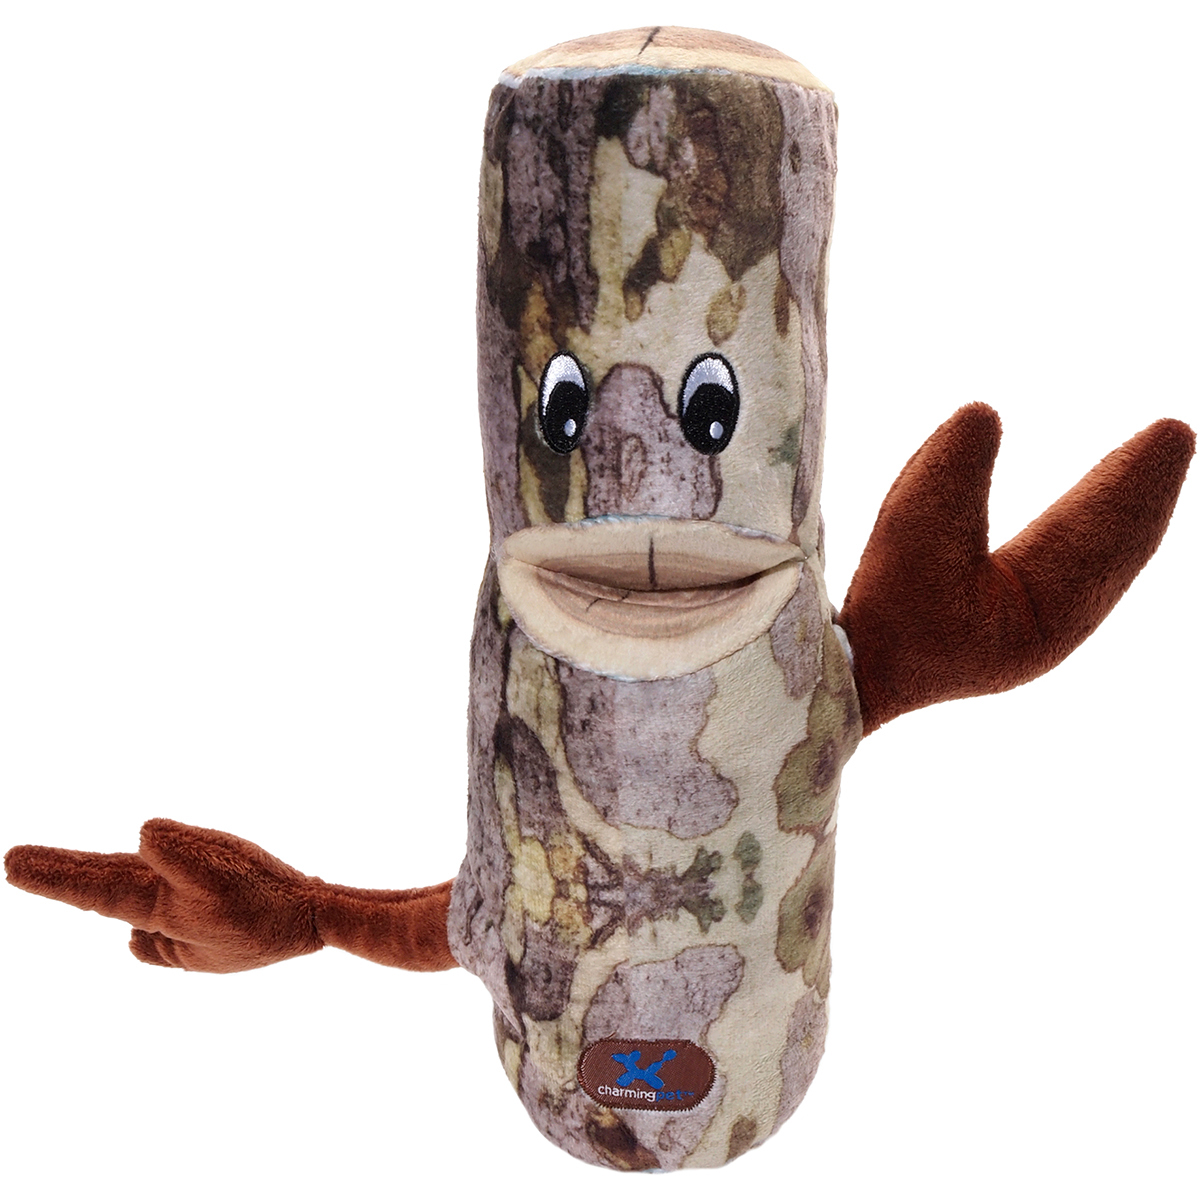 Charming Pet 61224s Sycamore - Barkers Pet Toy, Small - 3.5 X 13 X 10.5 In.